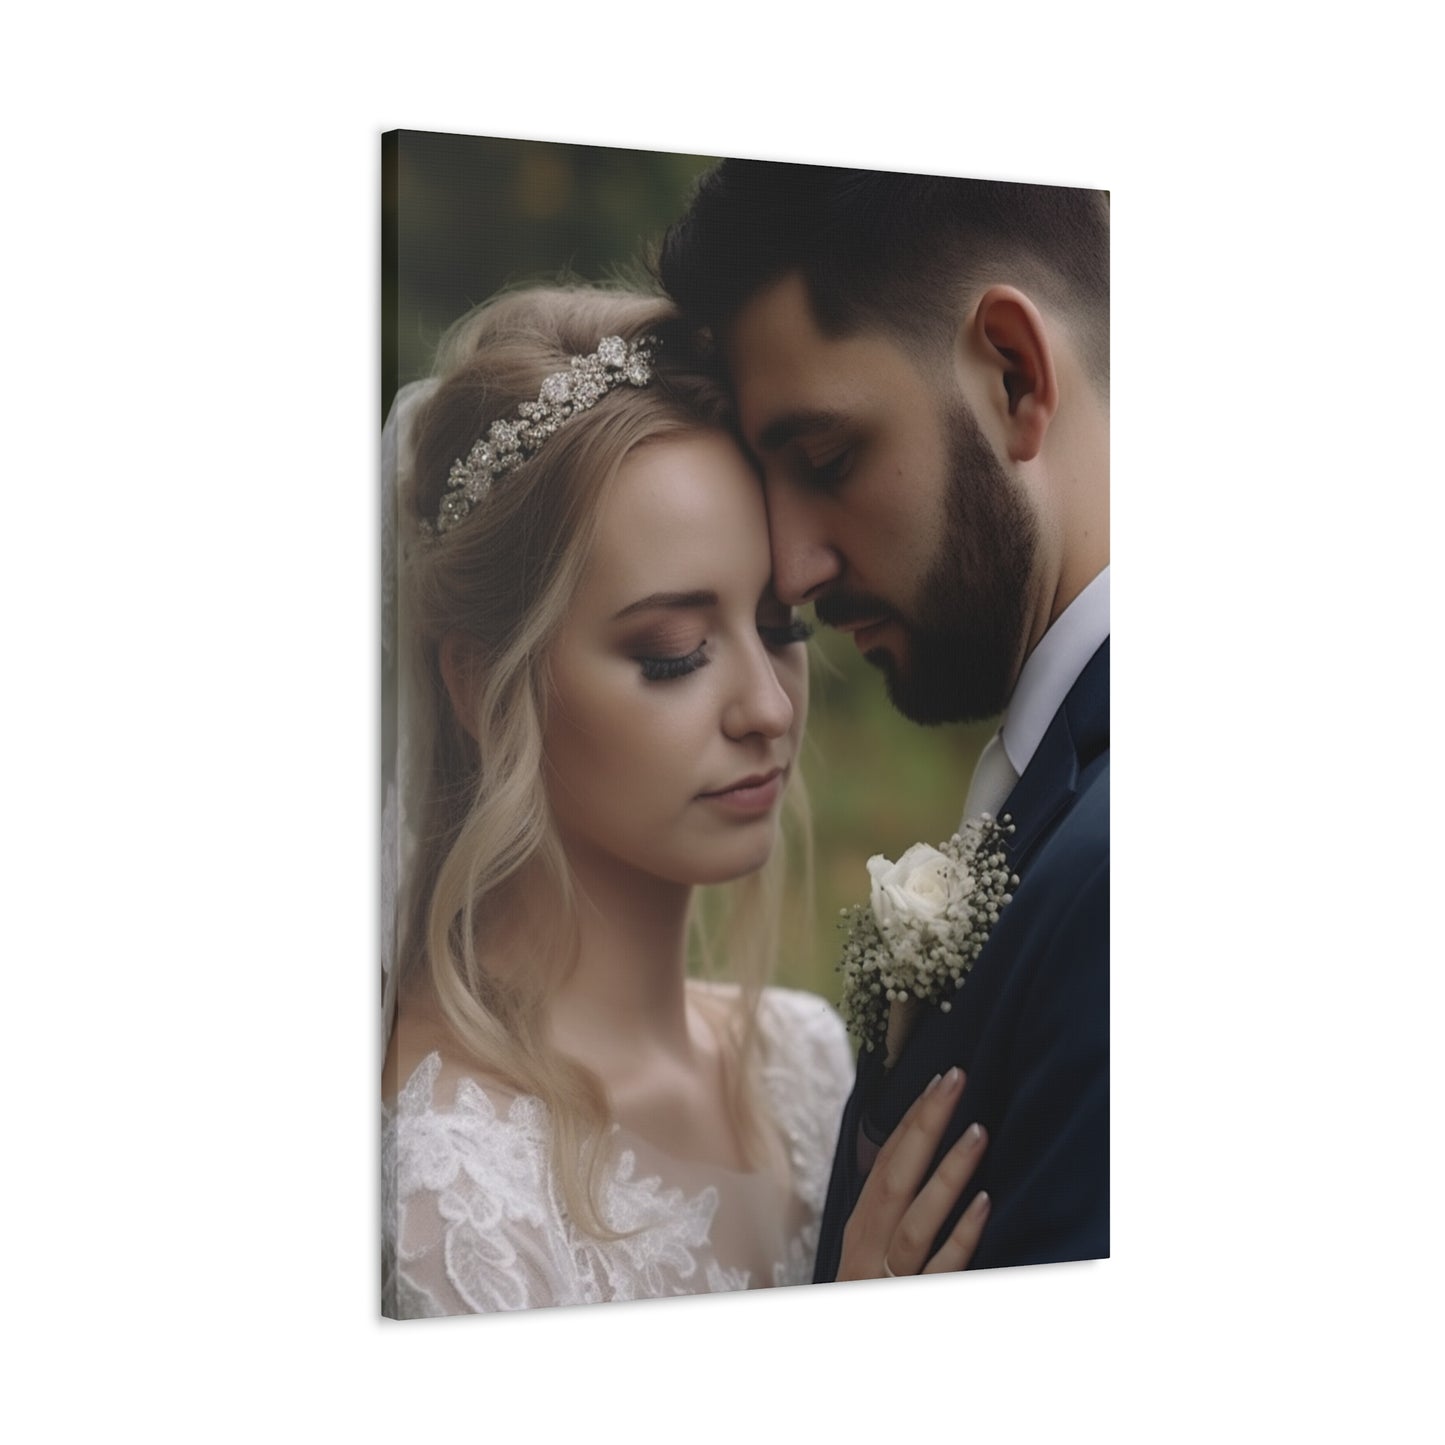 "Love Captured" Custom Photo Wall Art - Weave Got Gifts - Unique Gifts You Won’t Find Anywhere Else!